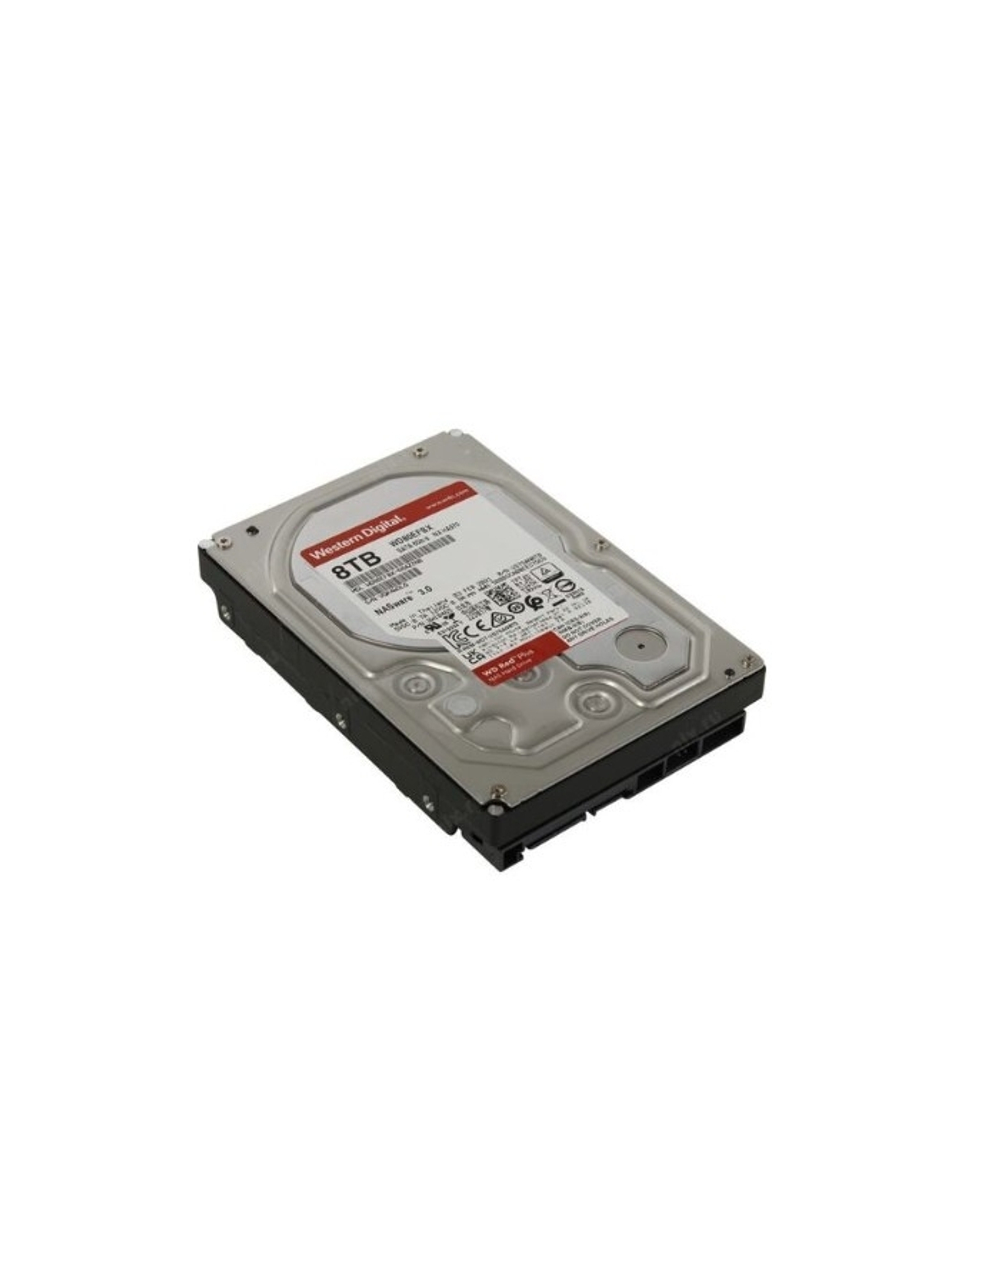 8TB WD Red Plus (WD80EFBX) (Serial ATA III, 7200- rpm, 256Mb, 3.5", NAS Edition)